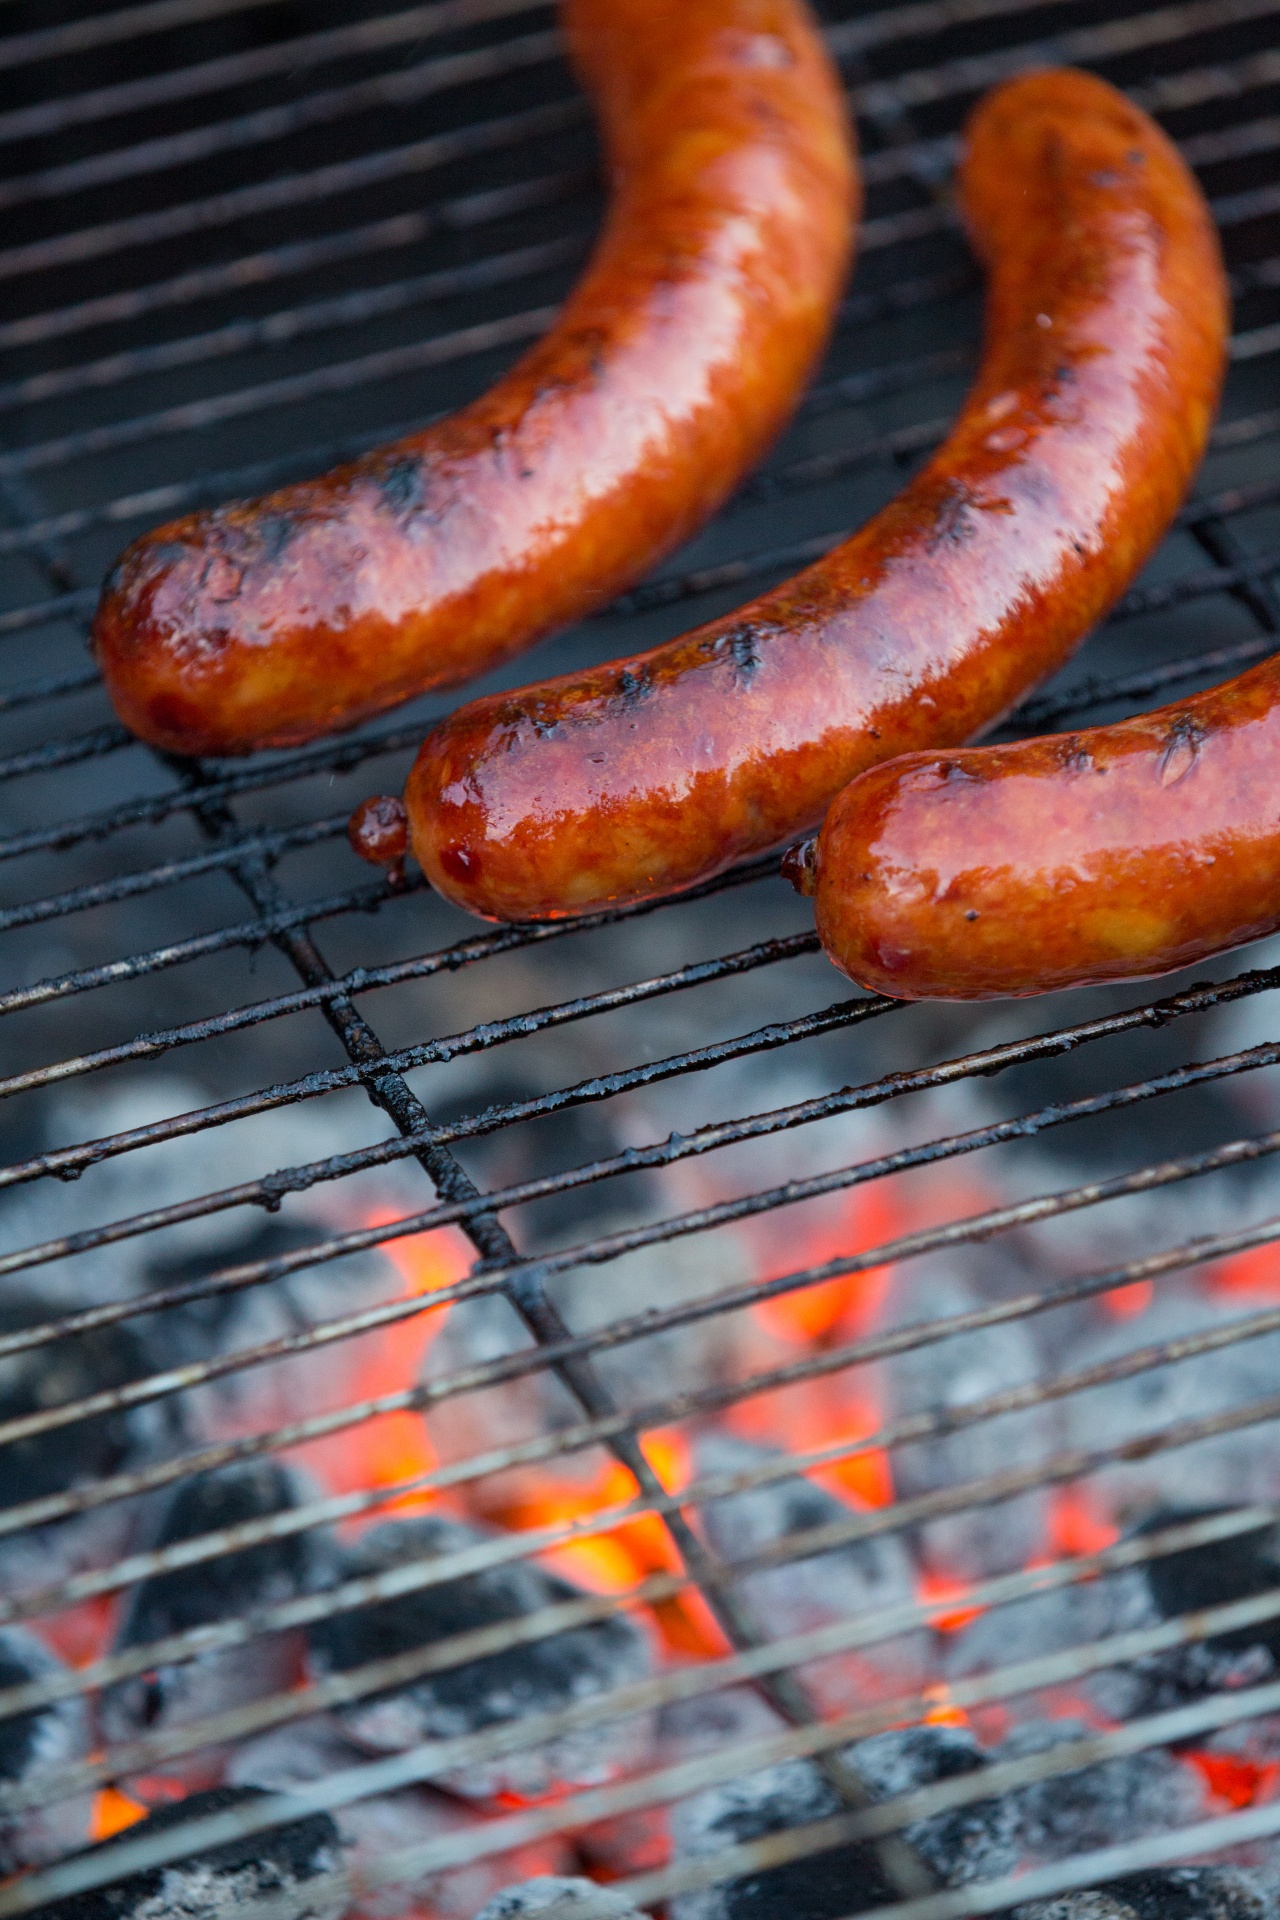 Barbecuing Sausages